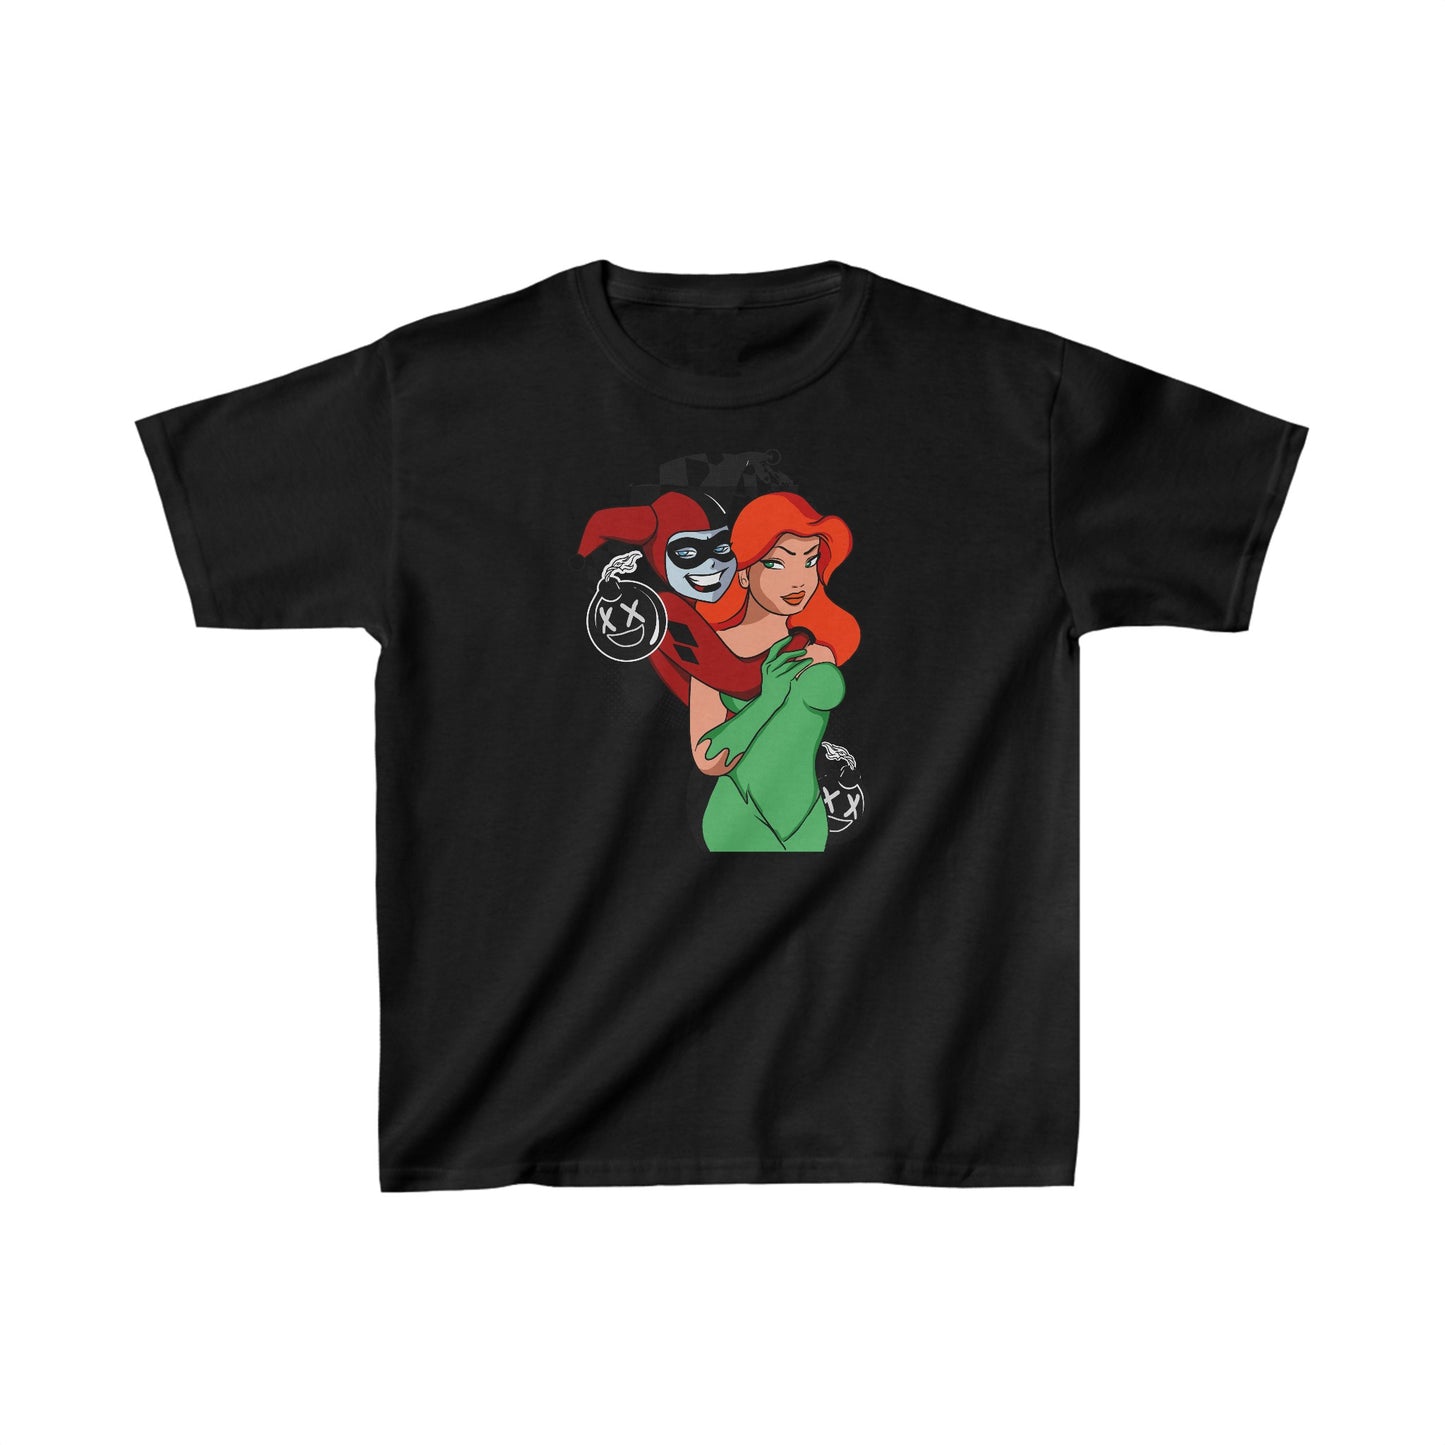 Harley & Poison Ivy Baby Tee